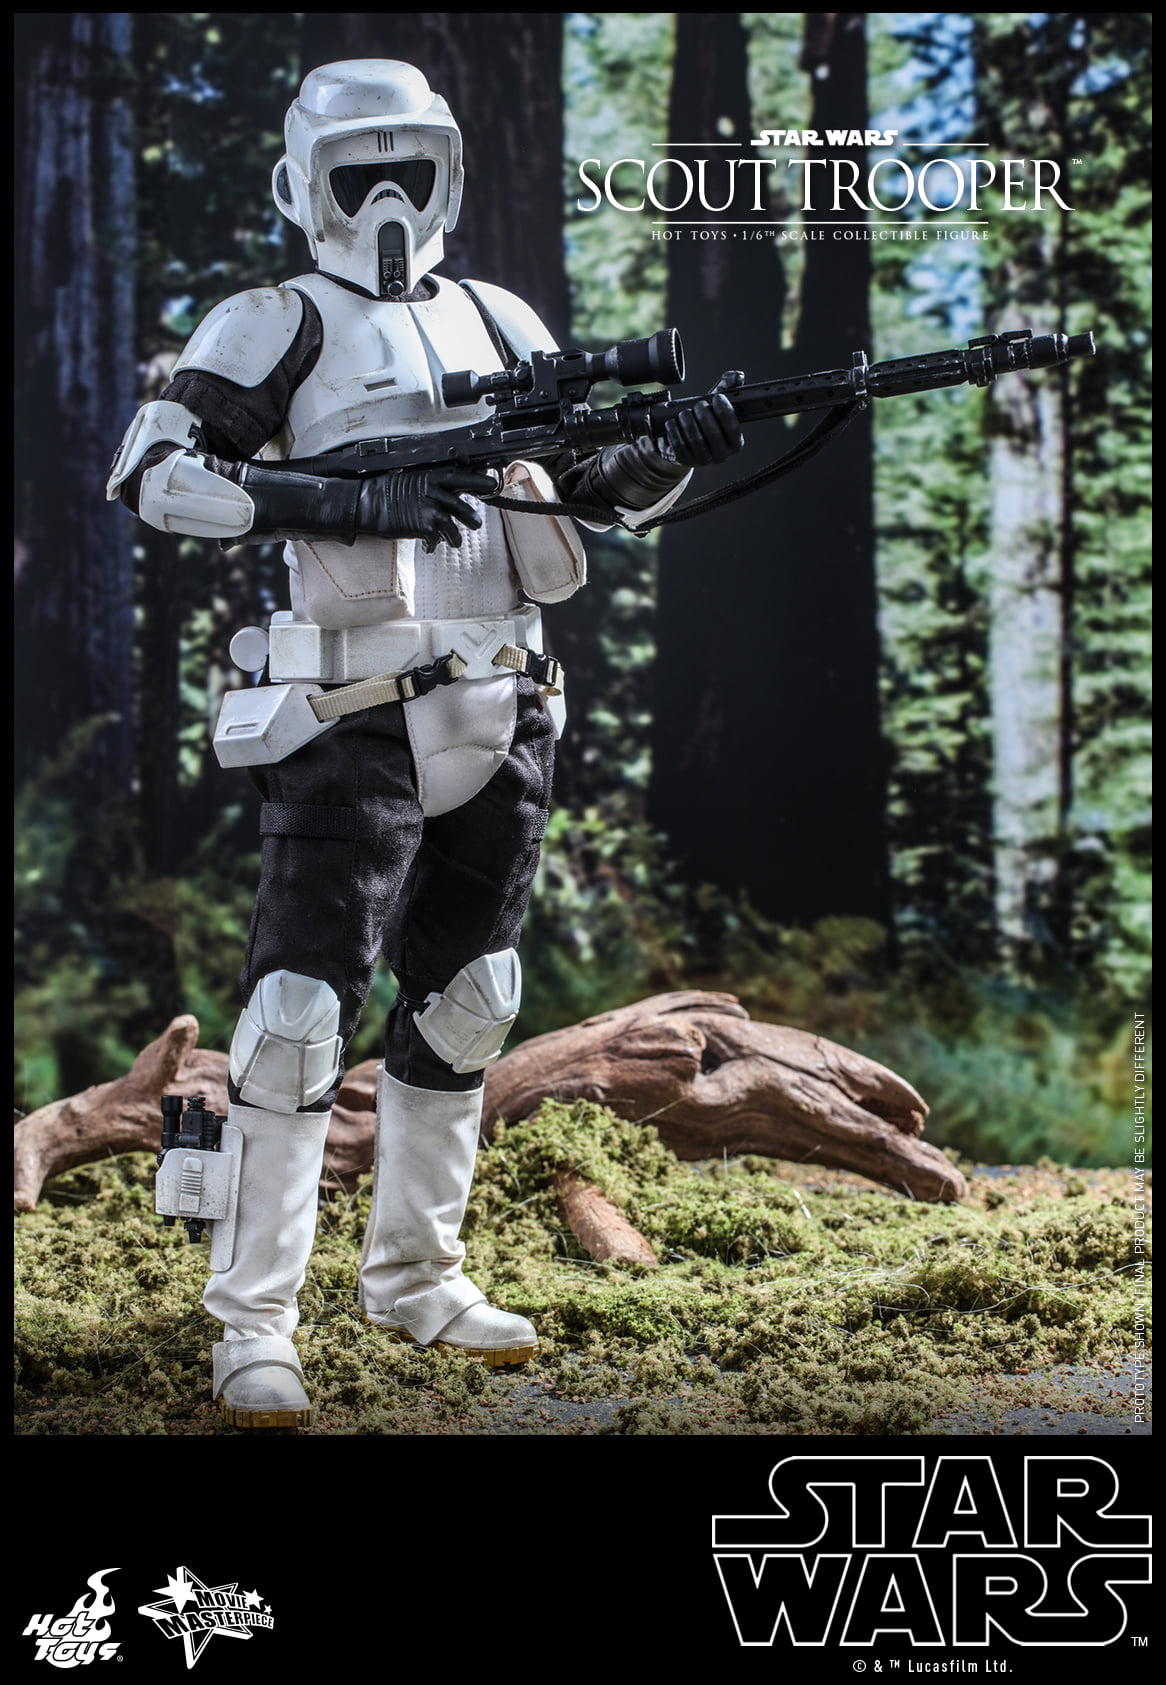 Hot Toys Star Wars Scout Trooper Return of the Jedi Sixth Scale Figure MMS611